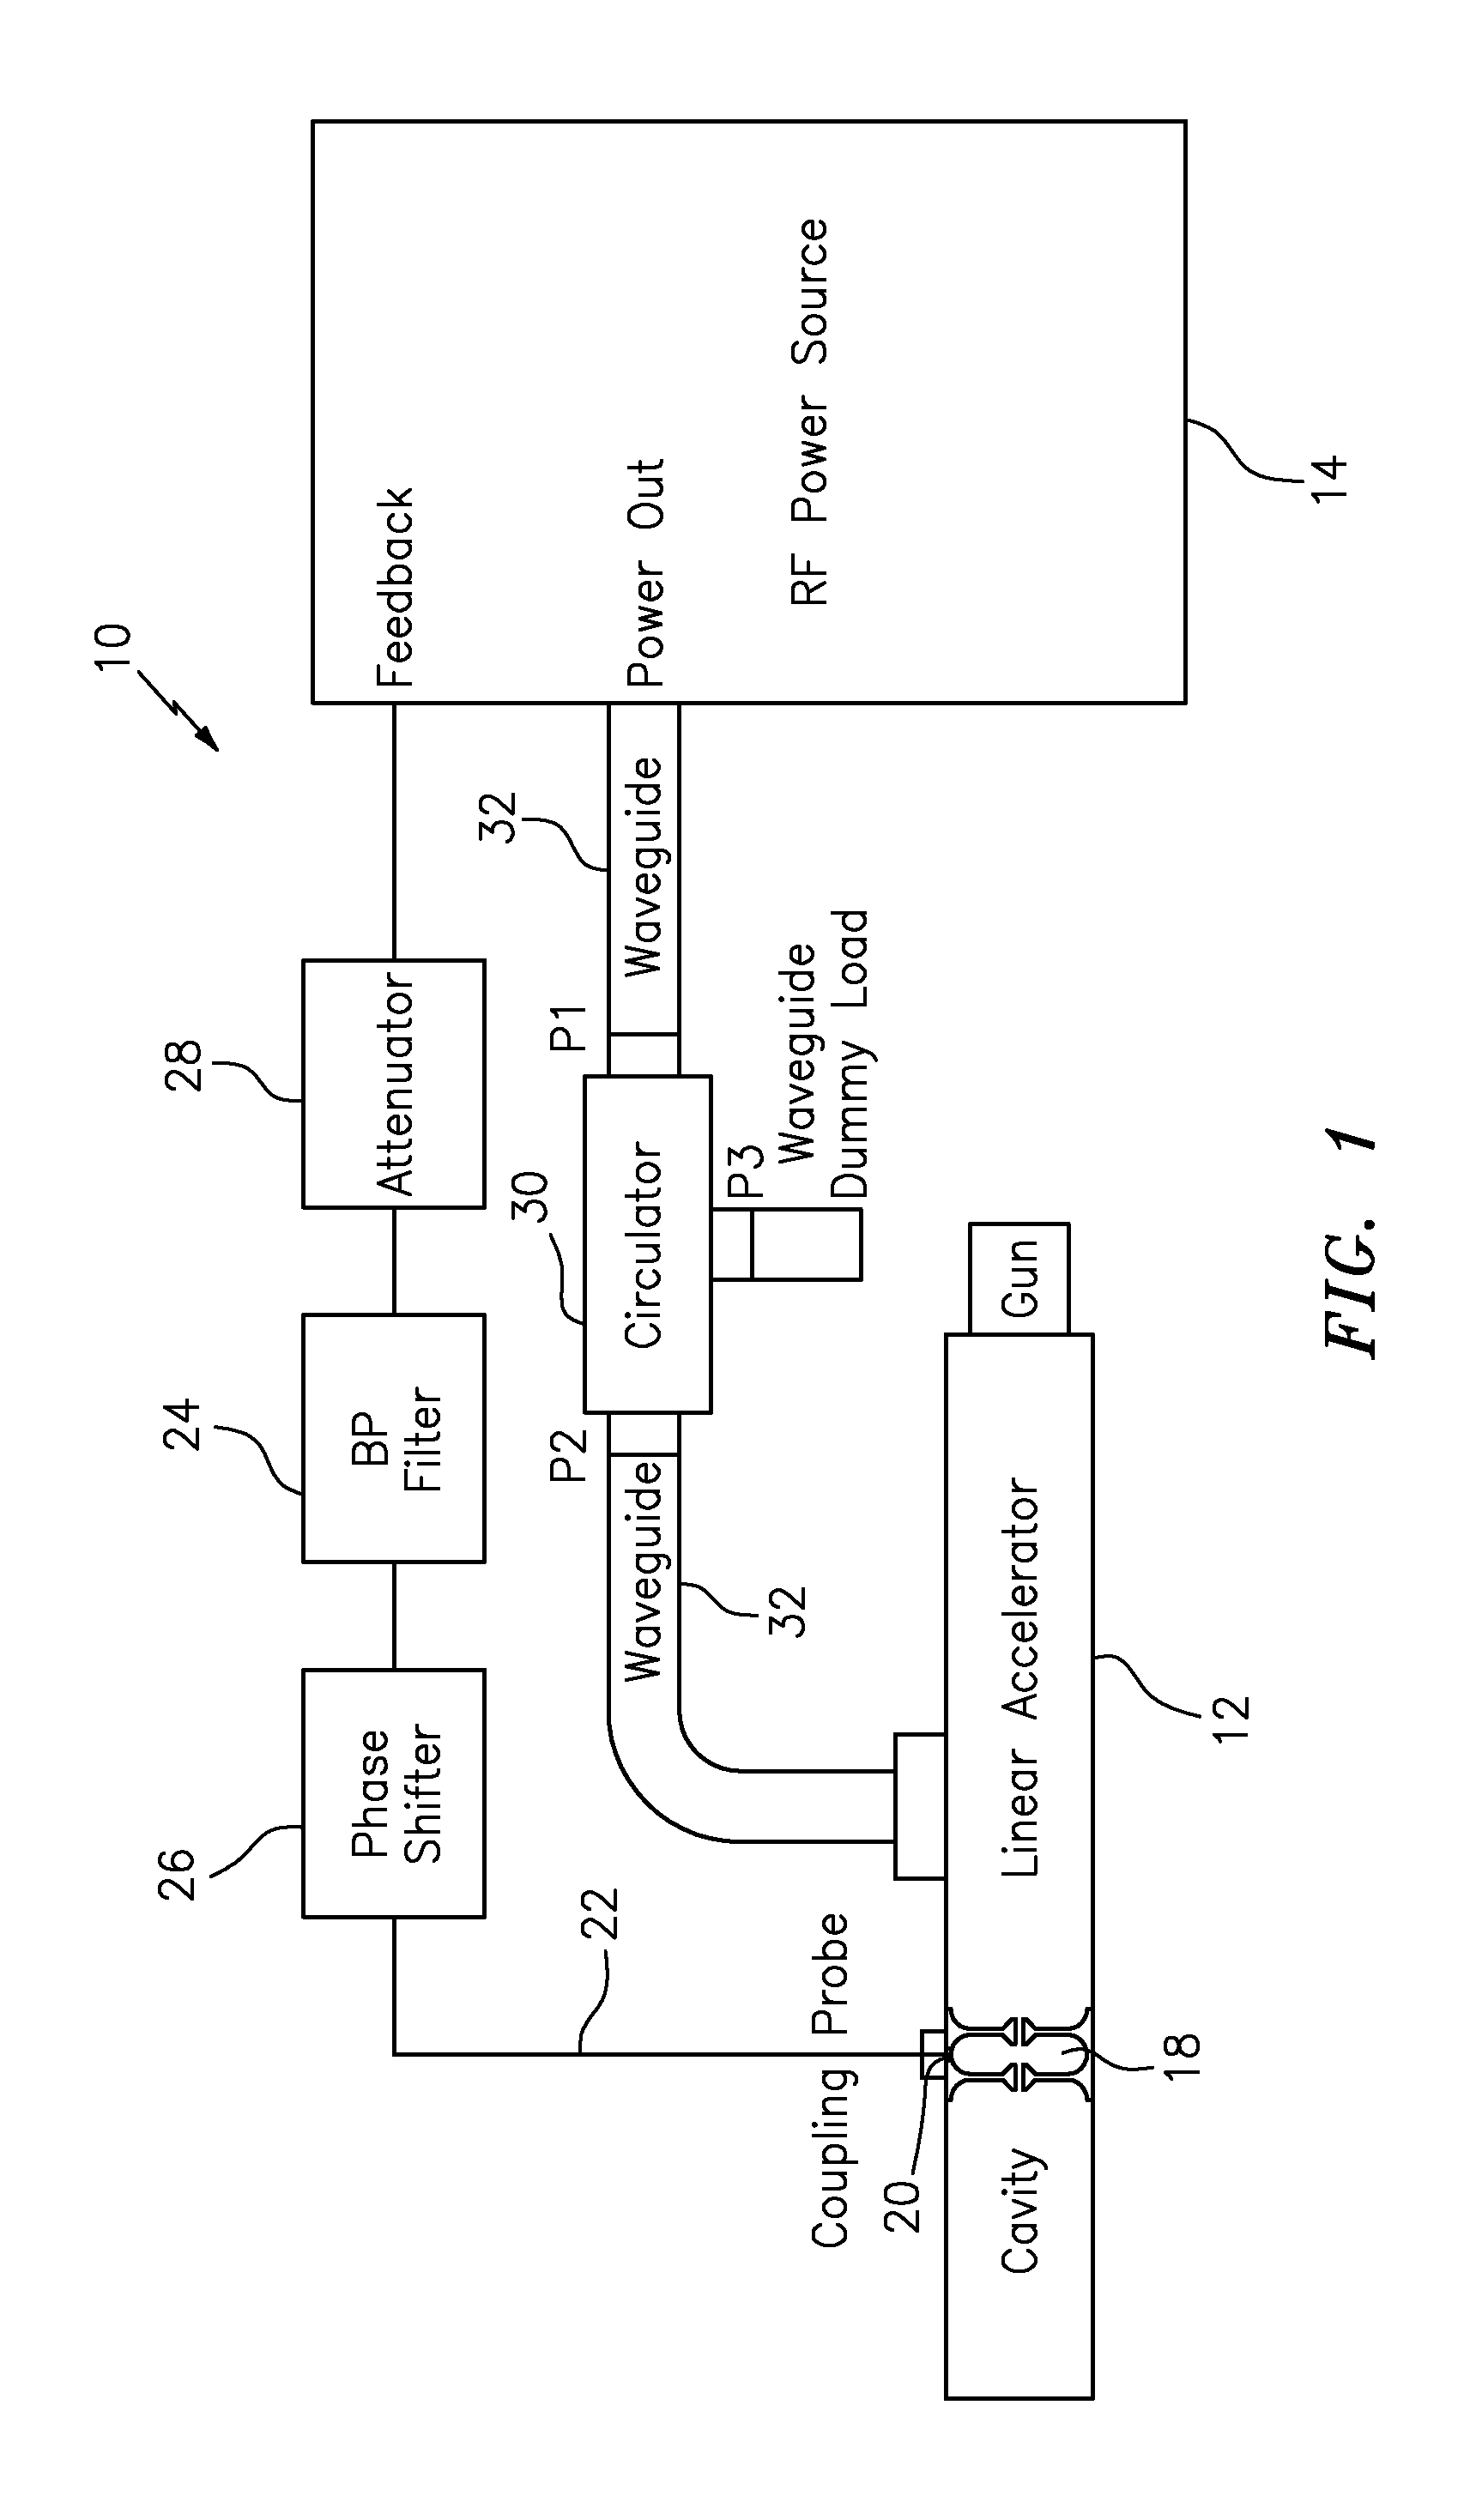 Method and system for controlling the frequency of a high power microwave source